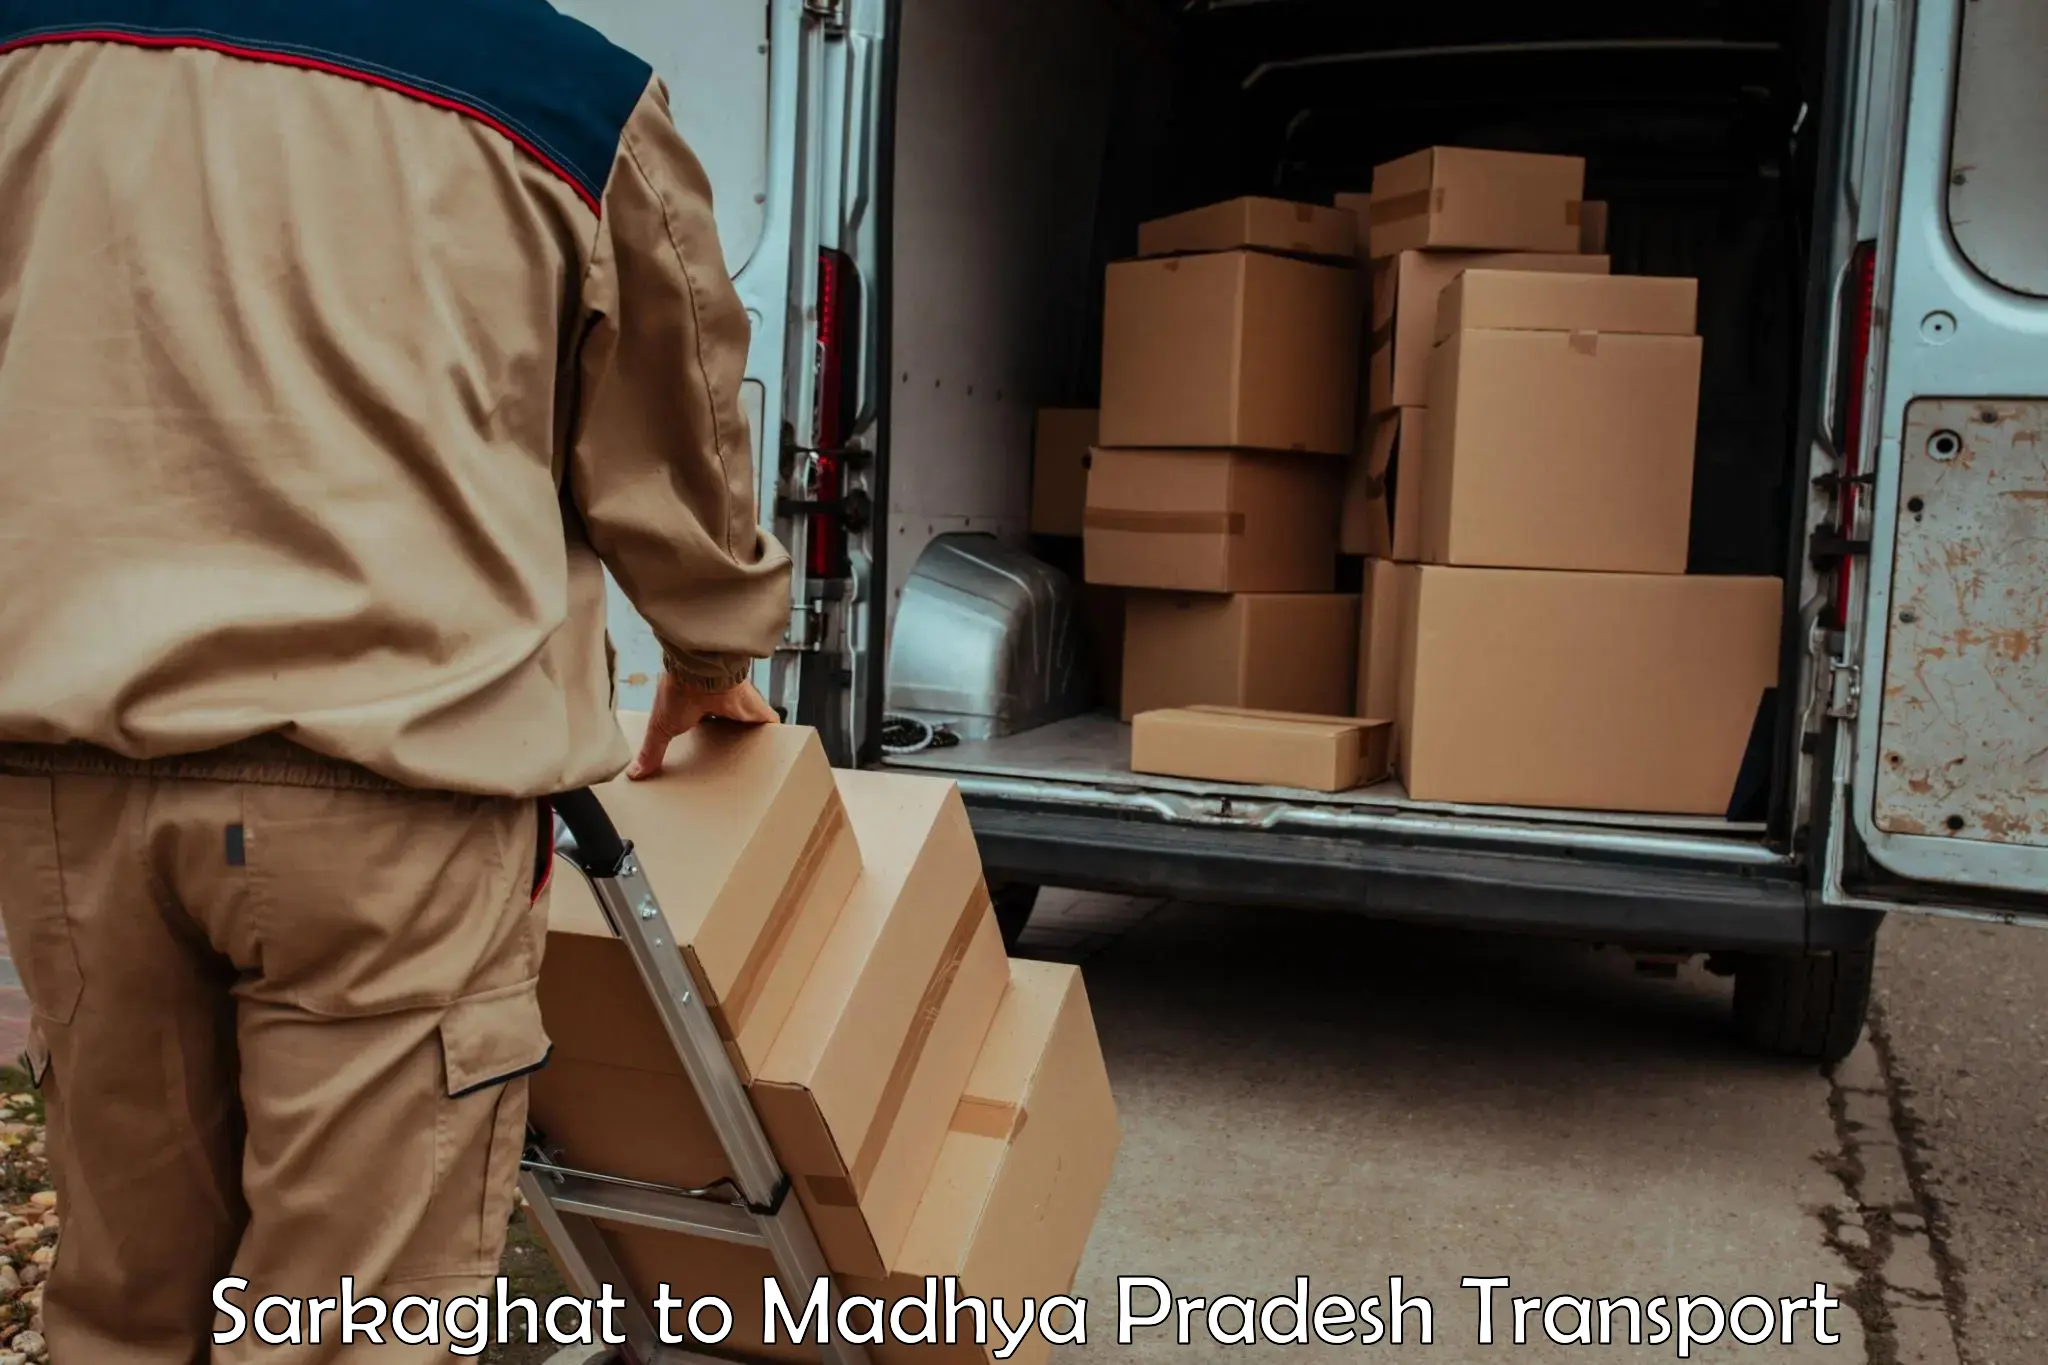 Truck transport companies in India in Sarkaghat to Burhanpur